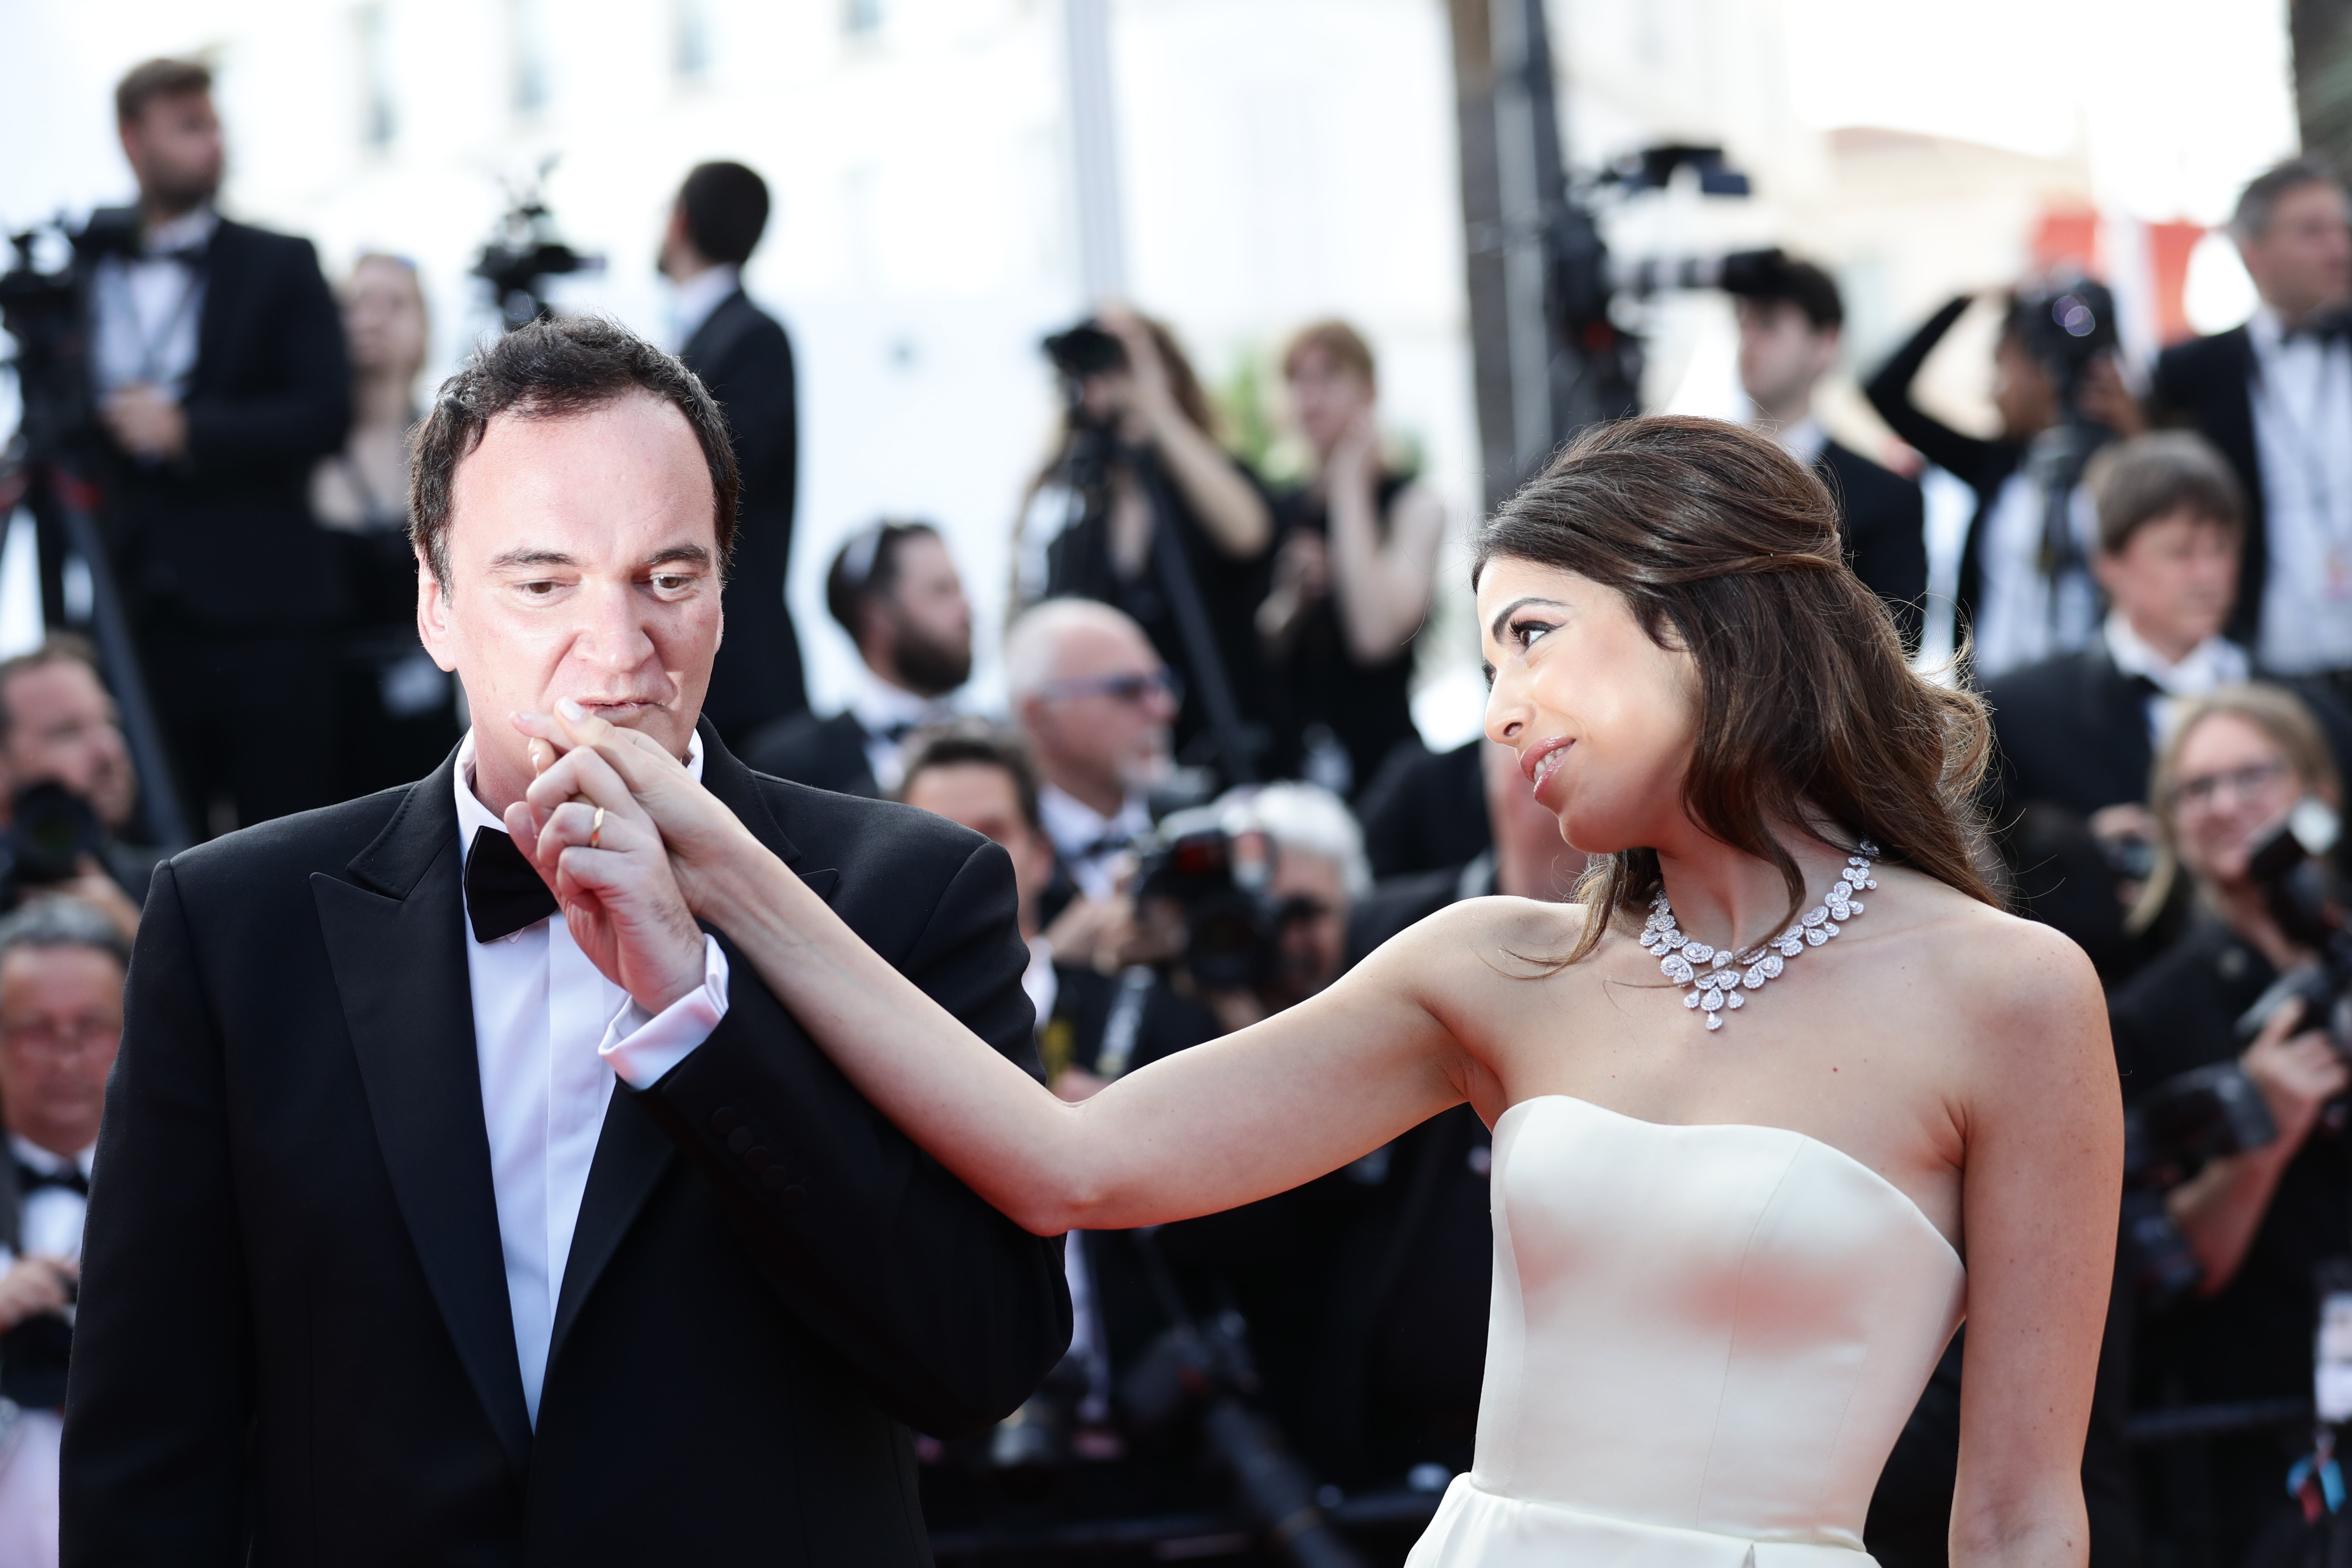 Quentin Tarantino and Daniella Pick attending the closing ceremony screening of "The Specials" during the 72nd annual Cannes Film Festival on May 25, 2019 in Cannes, France.┃Source: Getty Images